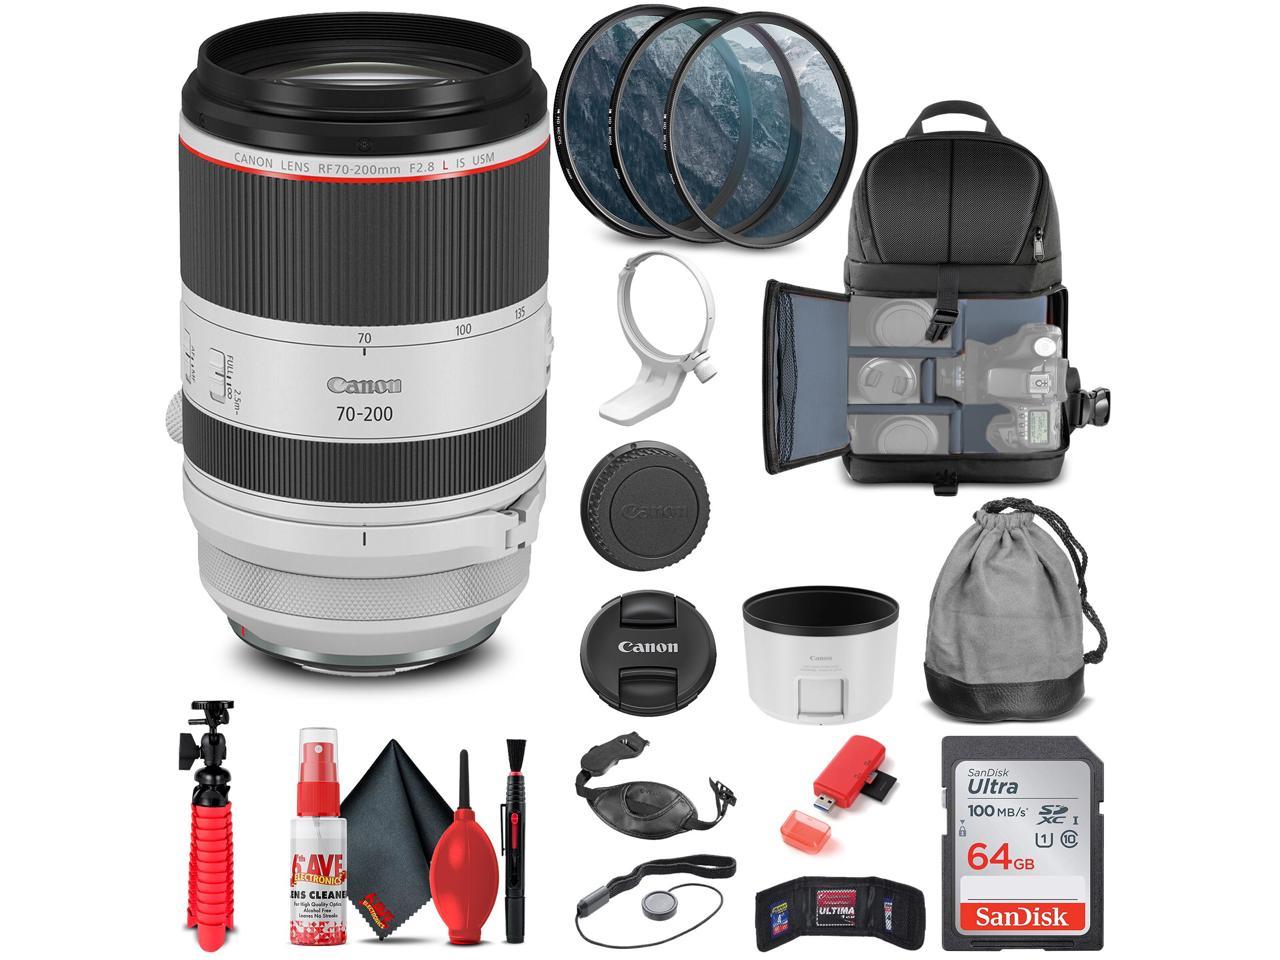 Monopod More Filter Kit Camera Backpack Canon EF 70-200mm f/2.8L is III USM Lens Bundle with Two Ritz Gear 32GB U3 Extreme Pro SD Cards 